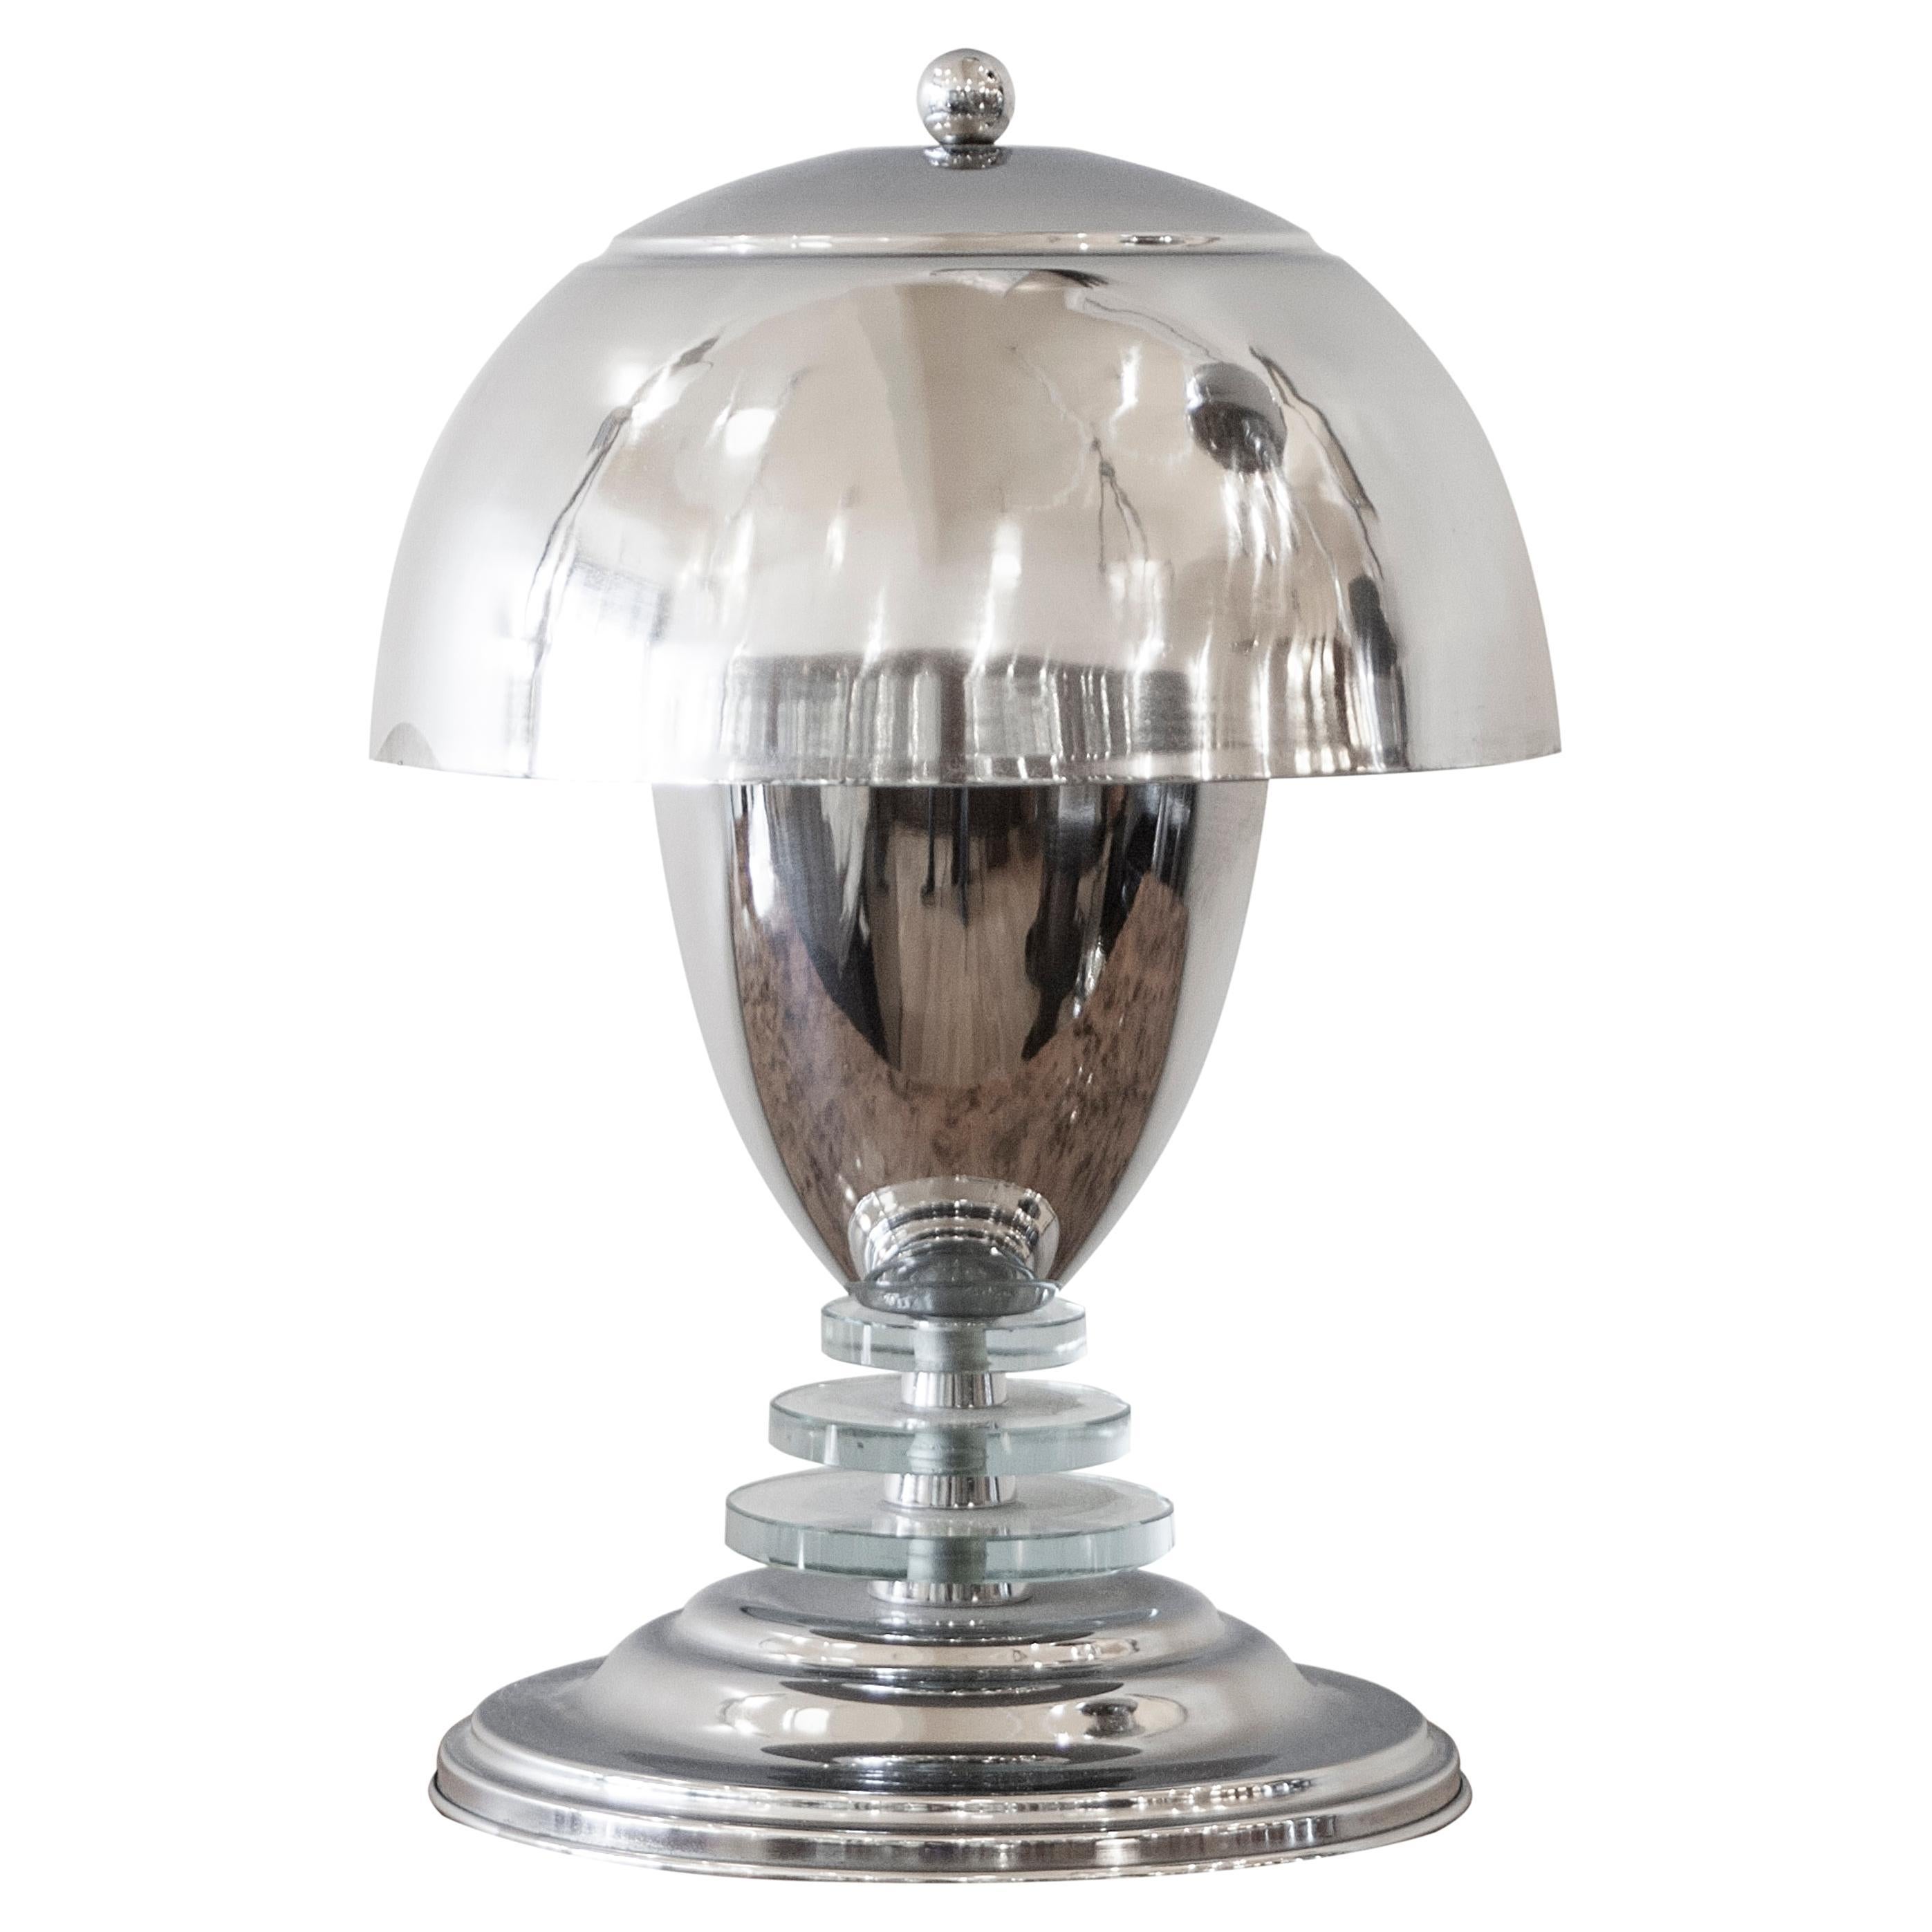 Art Deco Lamp, 1920, Material, Chrome and glass